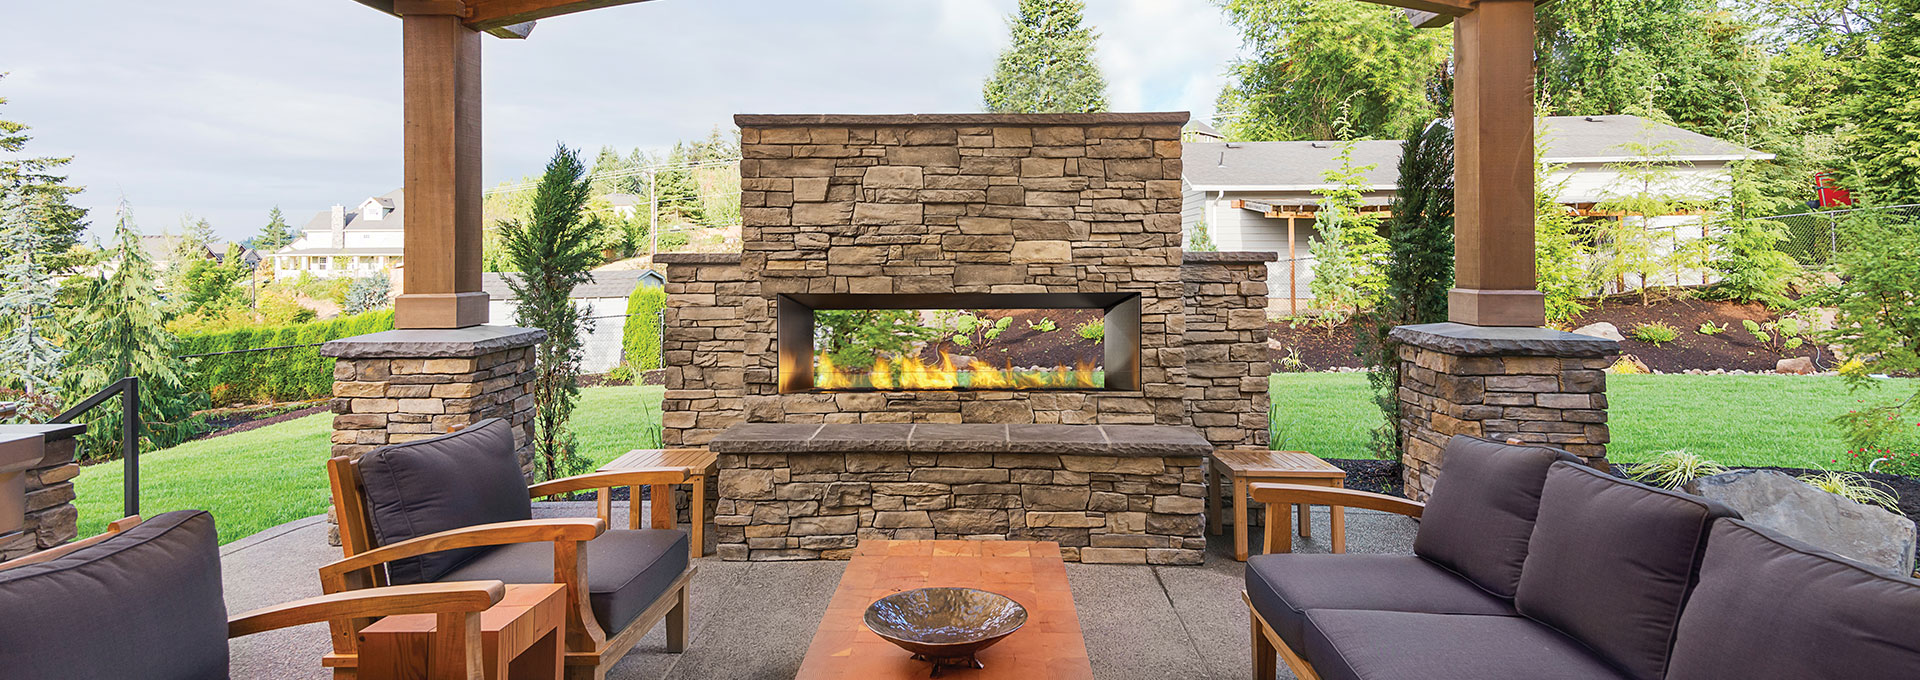 Outdoor Gas Fireplaces Fireplace Kits, Outdoor Gas Fireplace Units